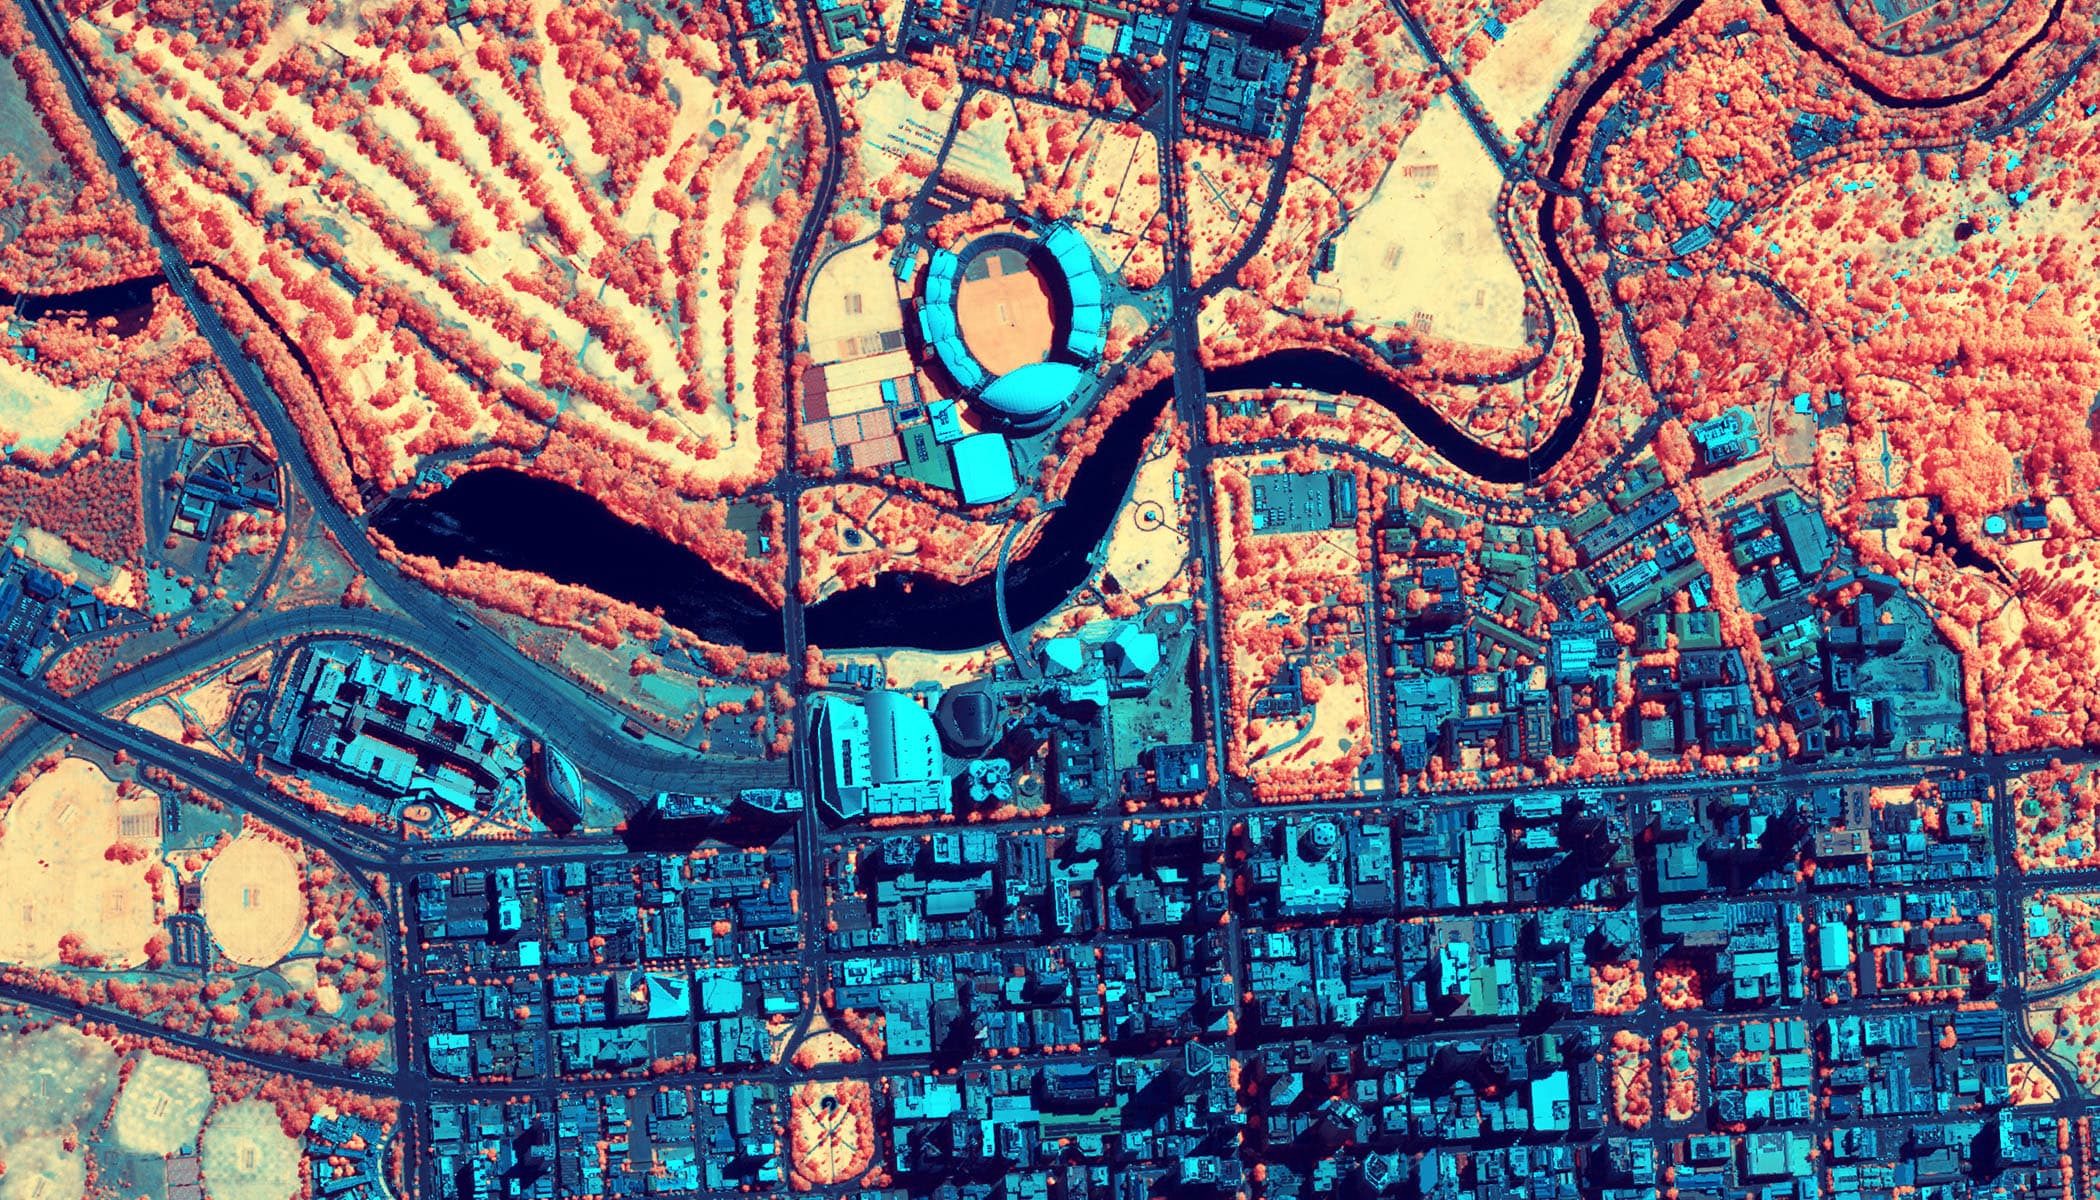 Aerial view of a city with a large stadium in the center, shown in a virtual color palette with blue, red and orange colors  